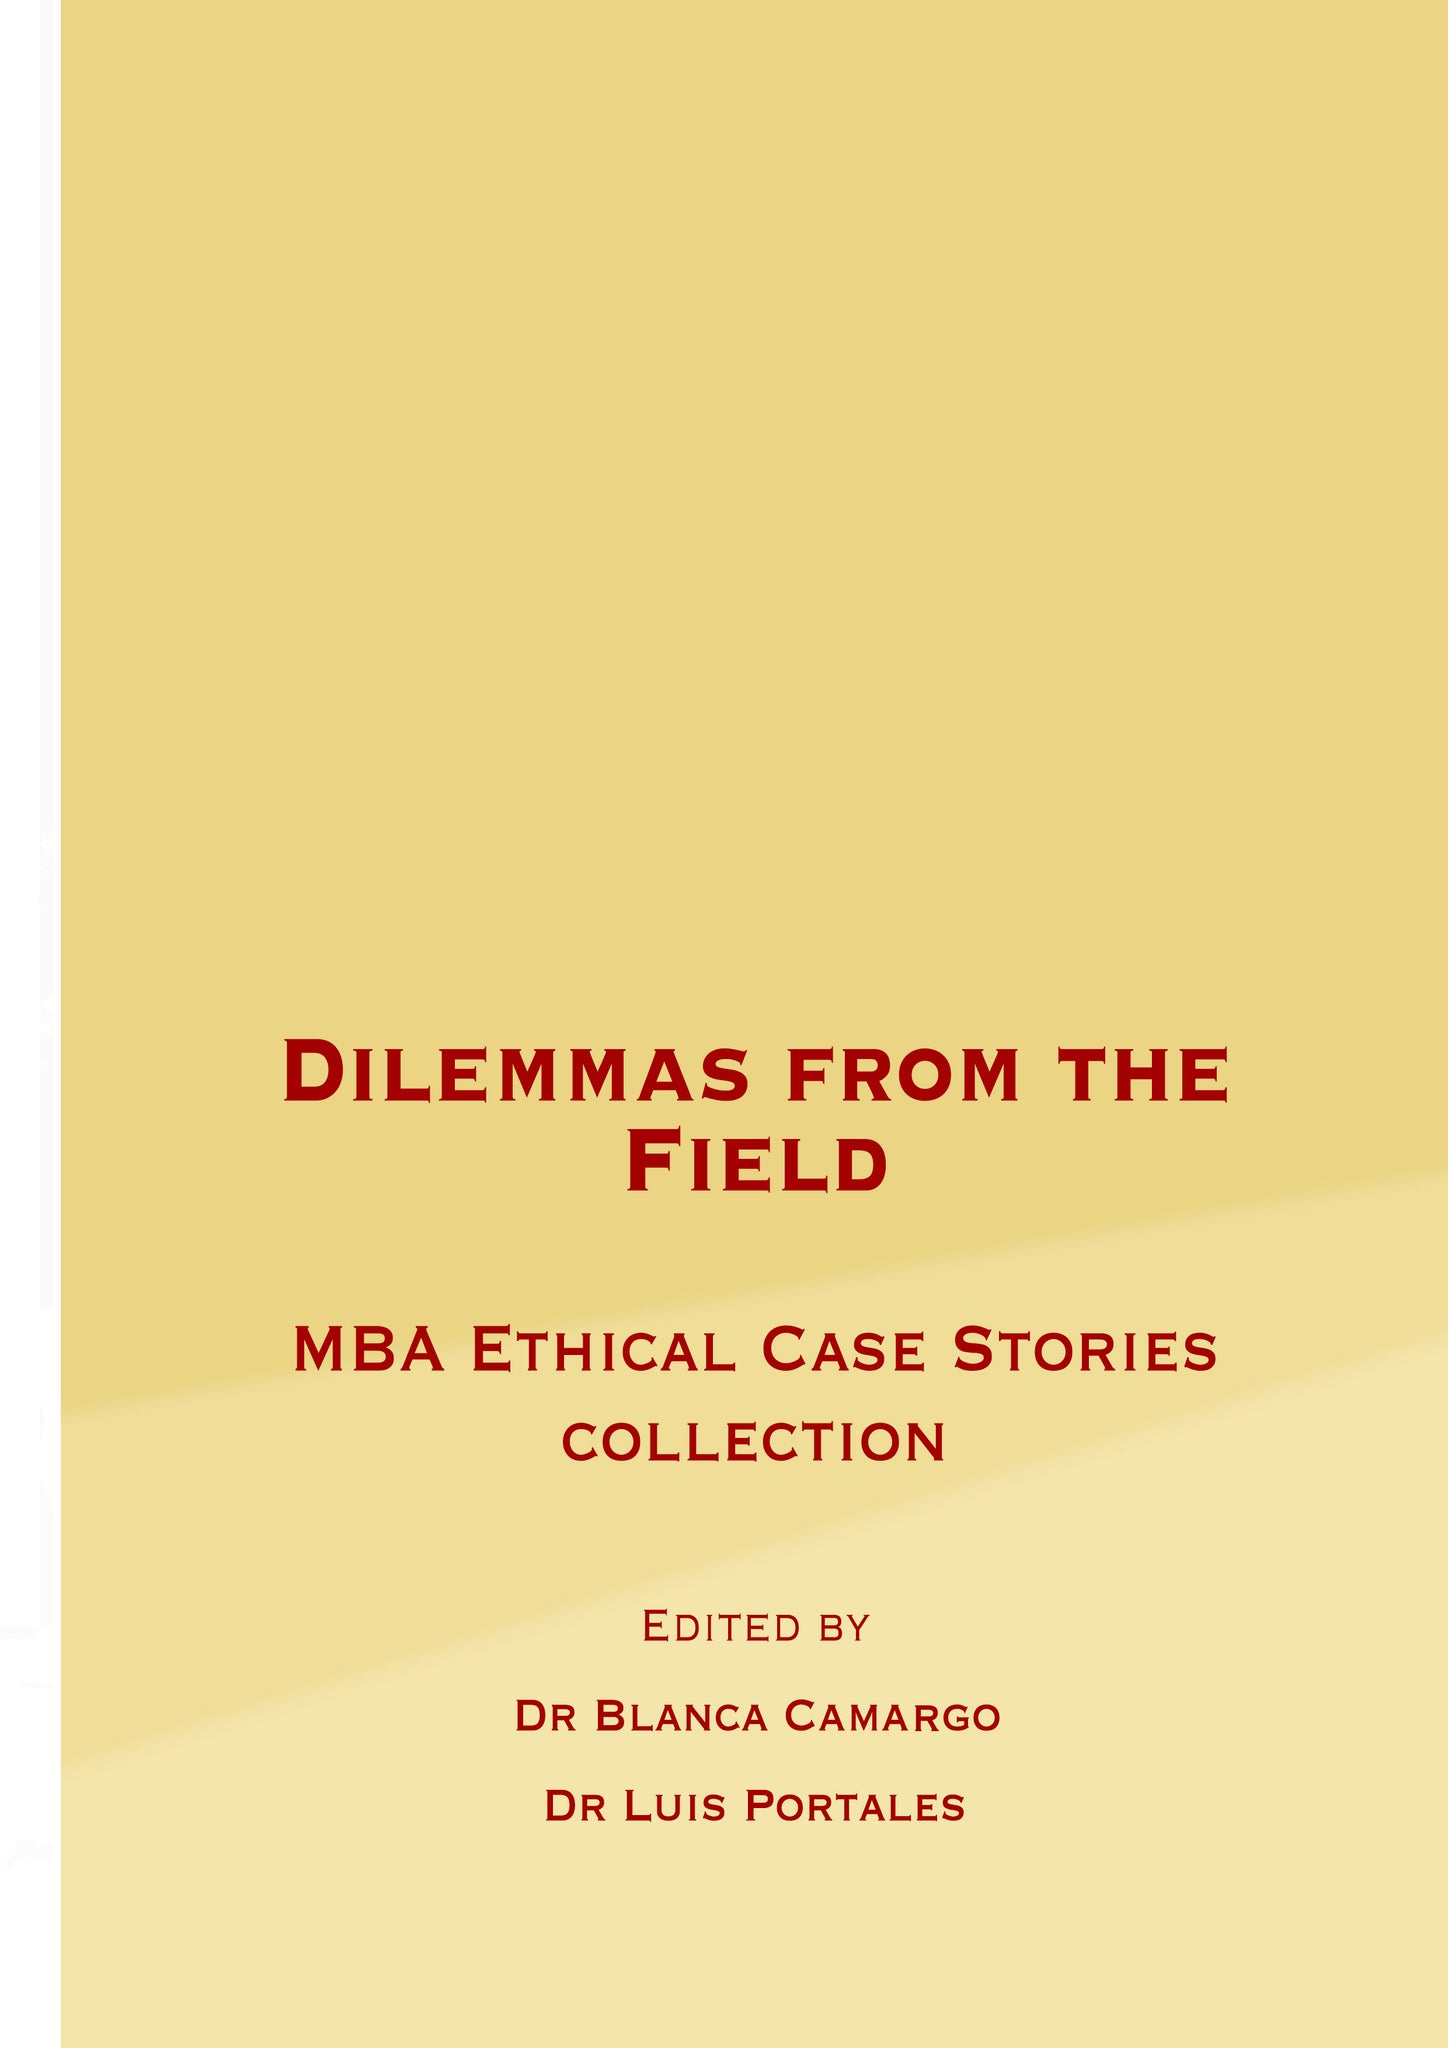 Dilemmas from the Field: MBA Ethical Case Stories collection